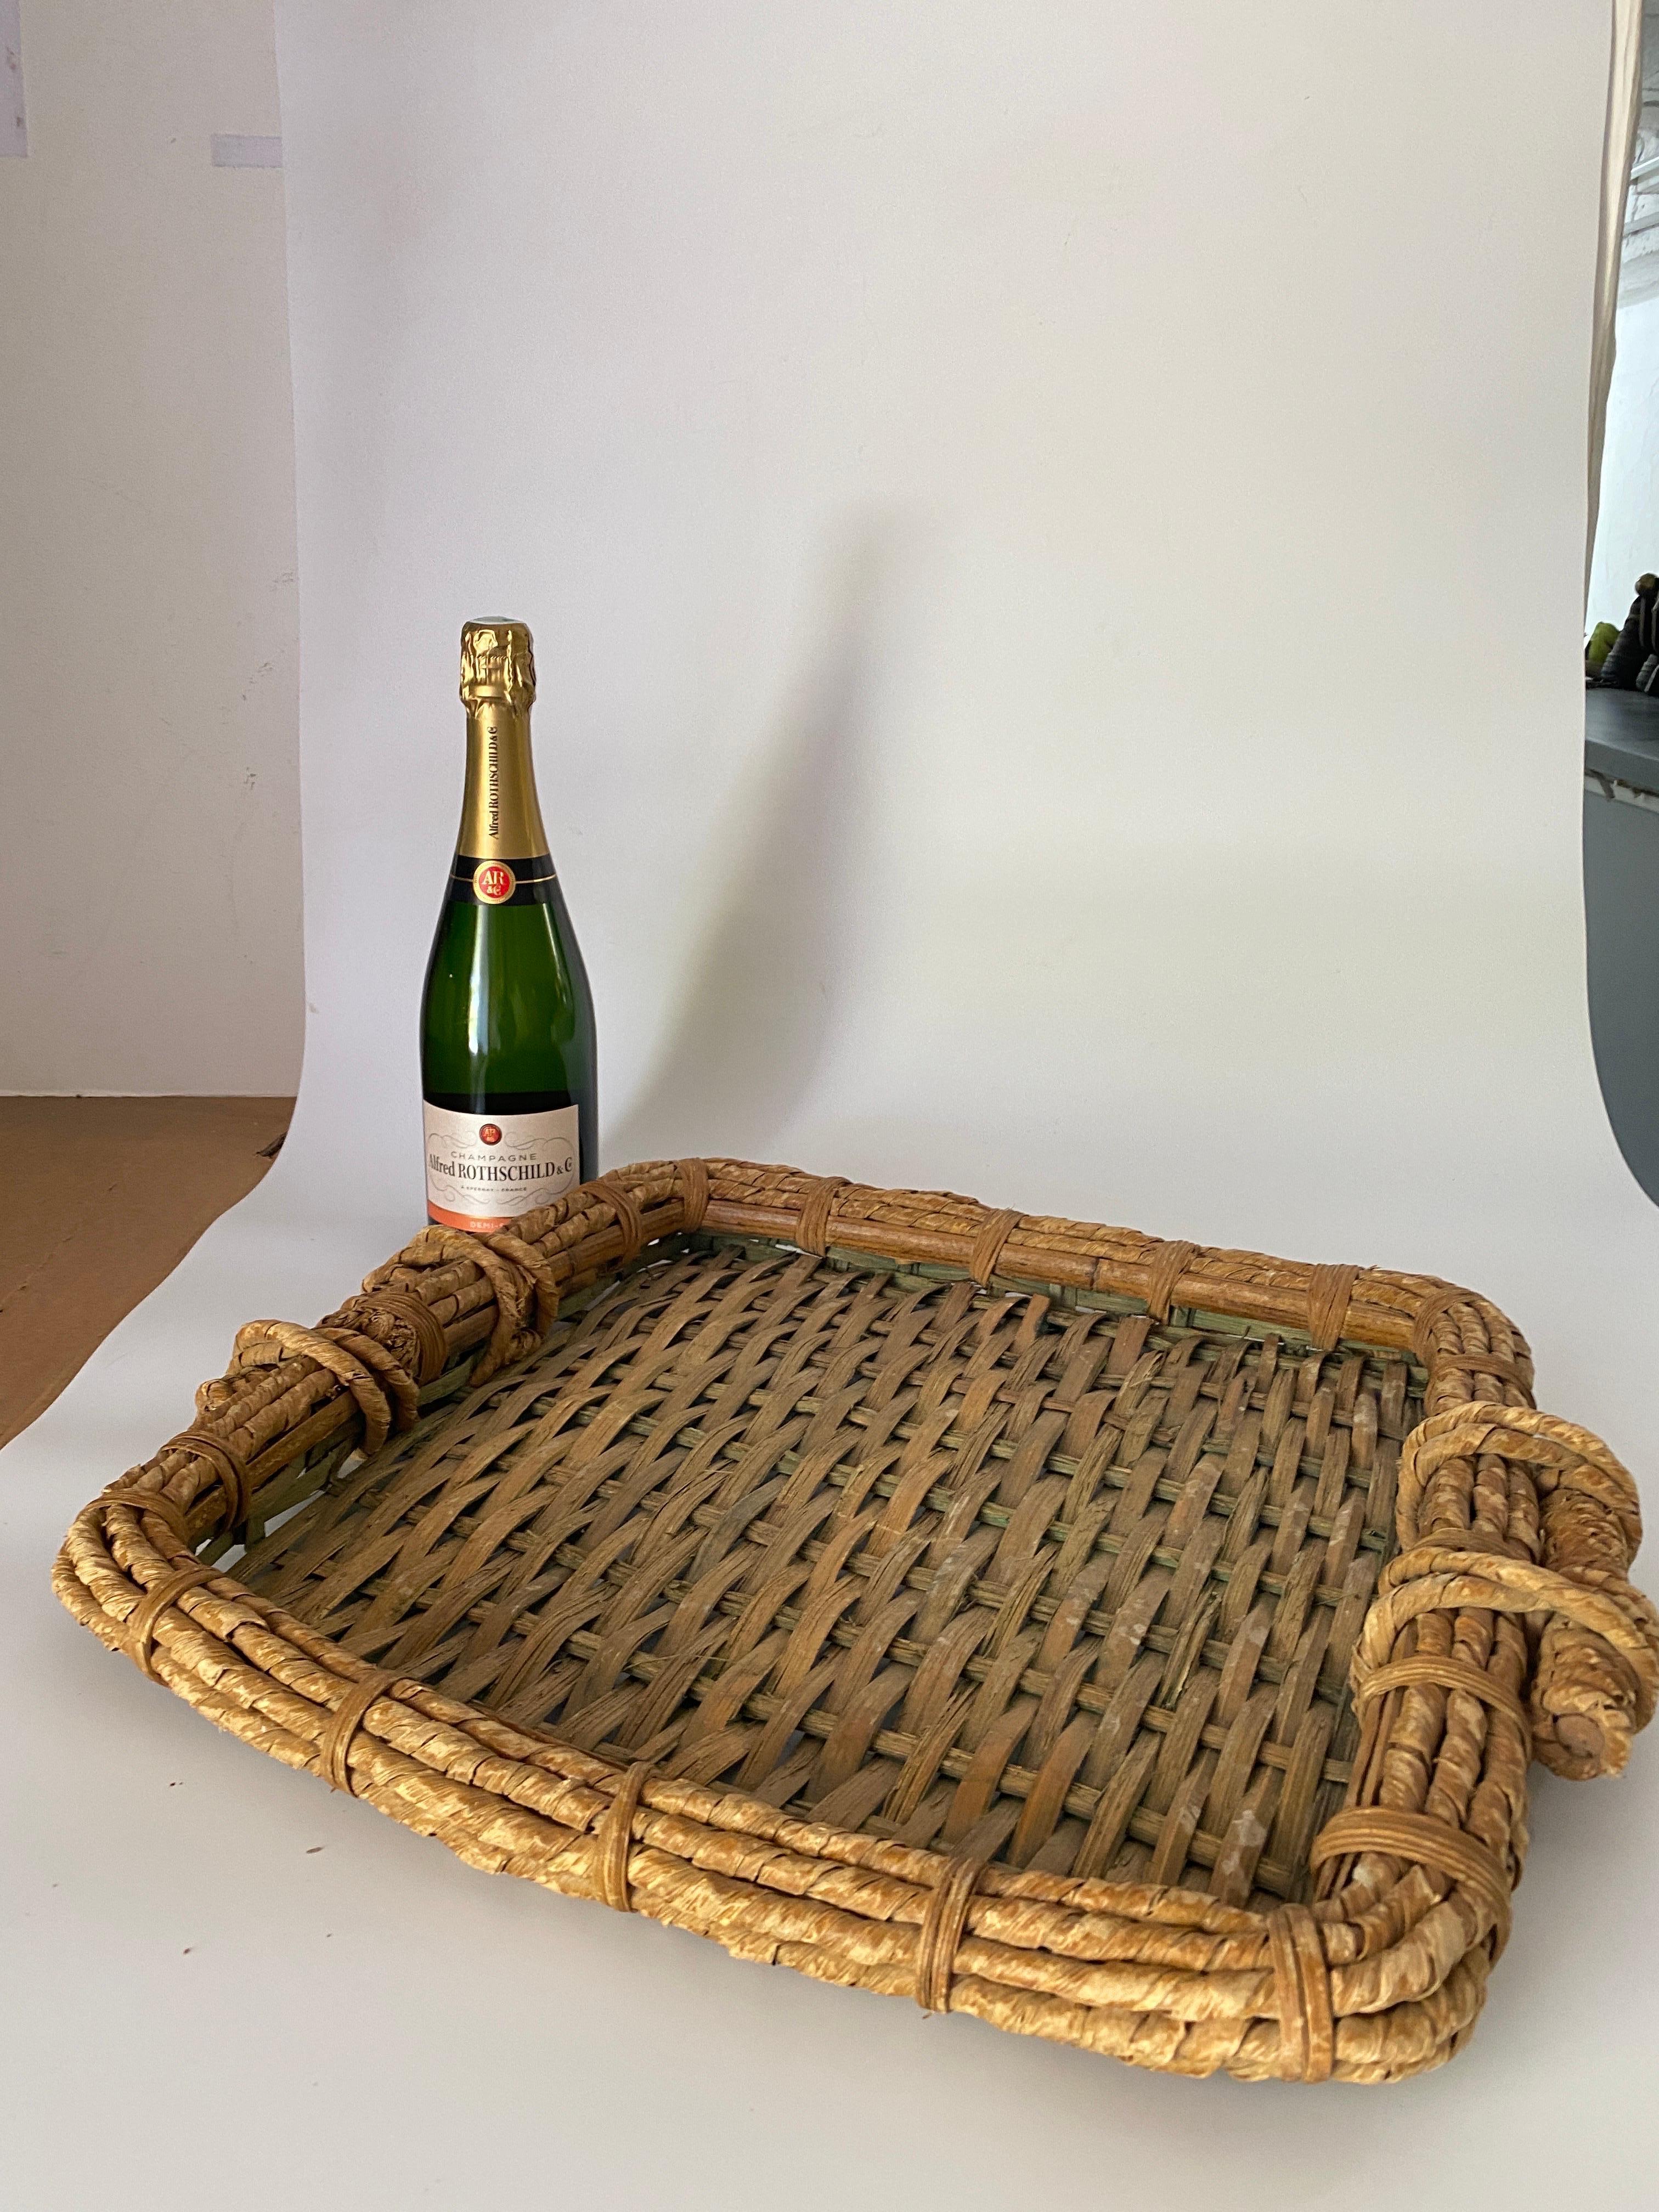 This Platter is in Wicker, Rattan, with an old Patina. This has been made in France, circa 1970.